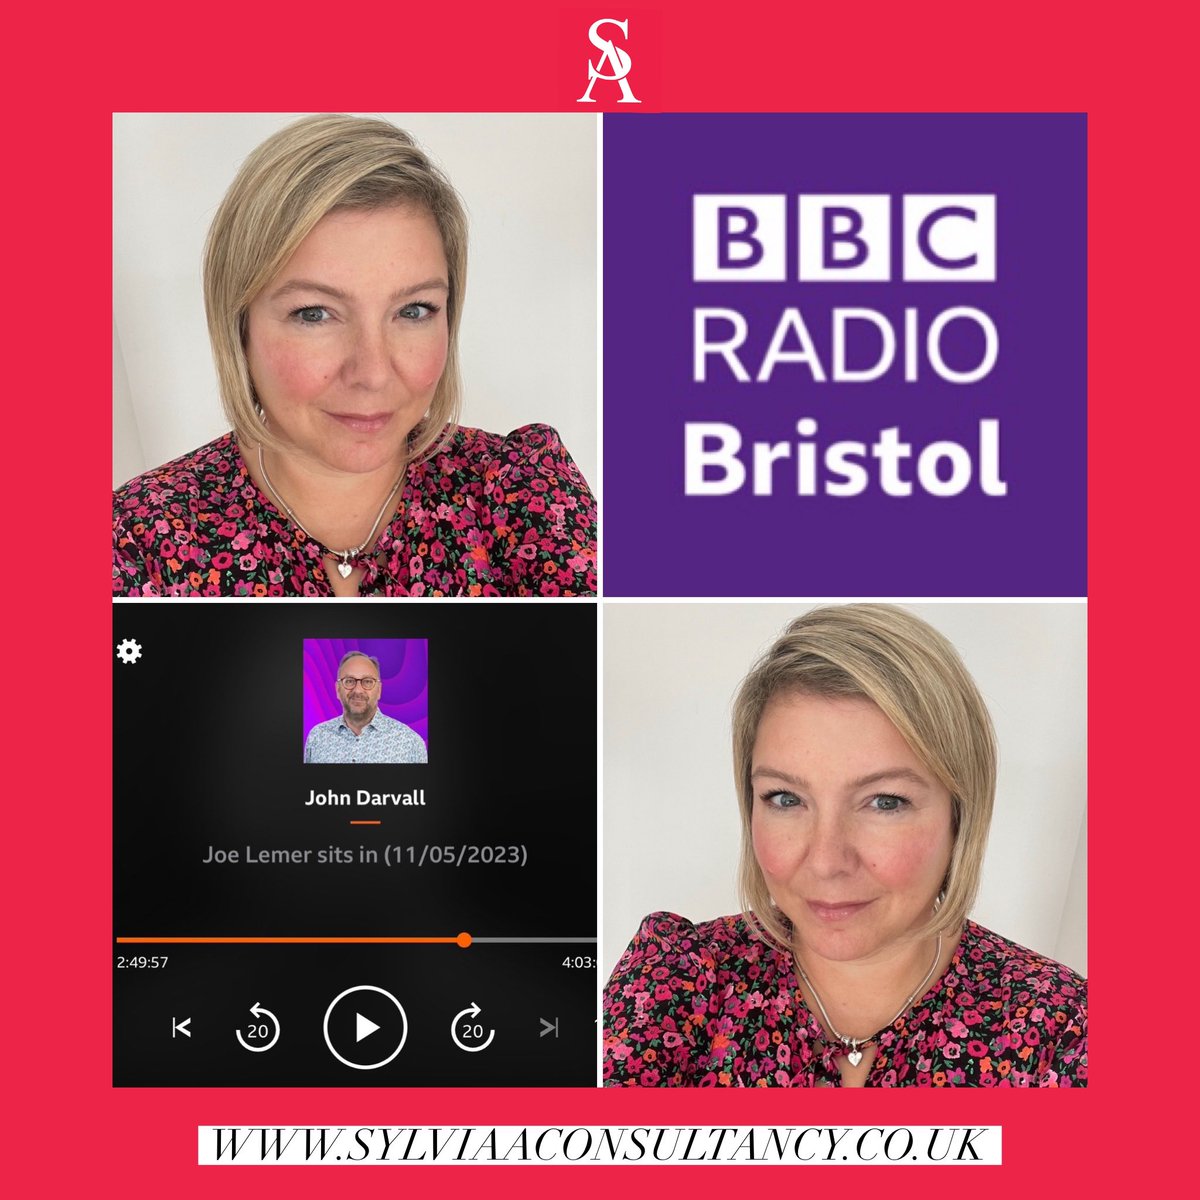 Where do you keep your butter? In the fridge or the kitchen worktop? Thank you for having me on your show at BBC Radio Bristol @BBCSounds #foodsafetyexpert #foodhygieneexpert #bbcradio